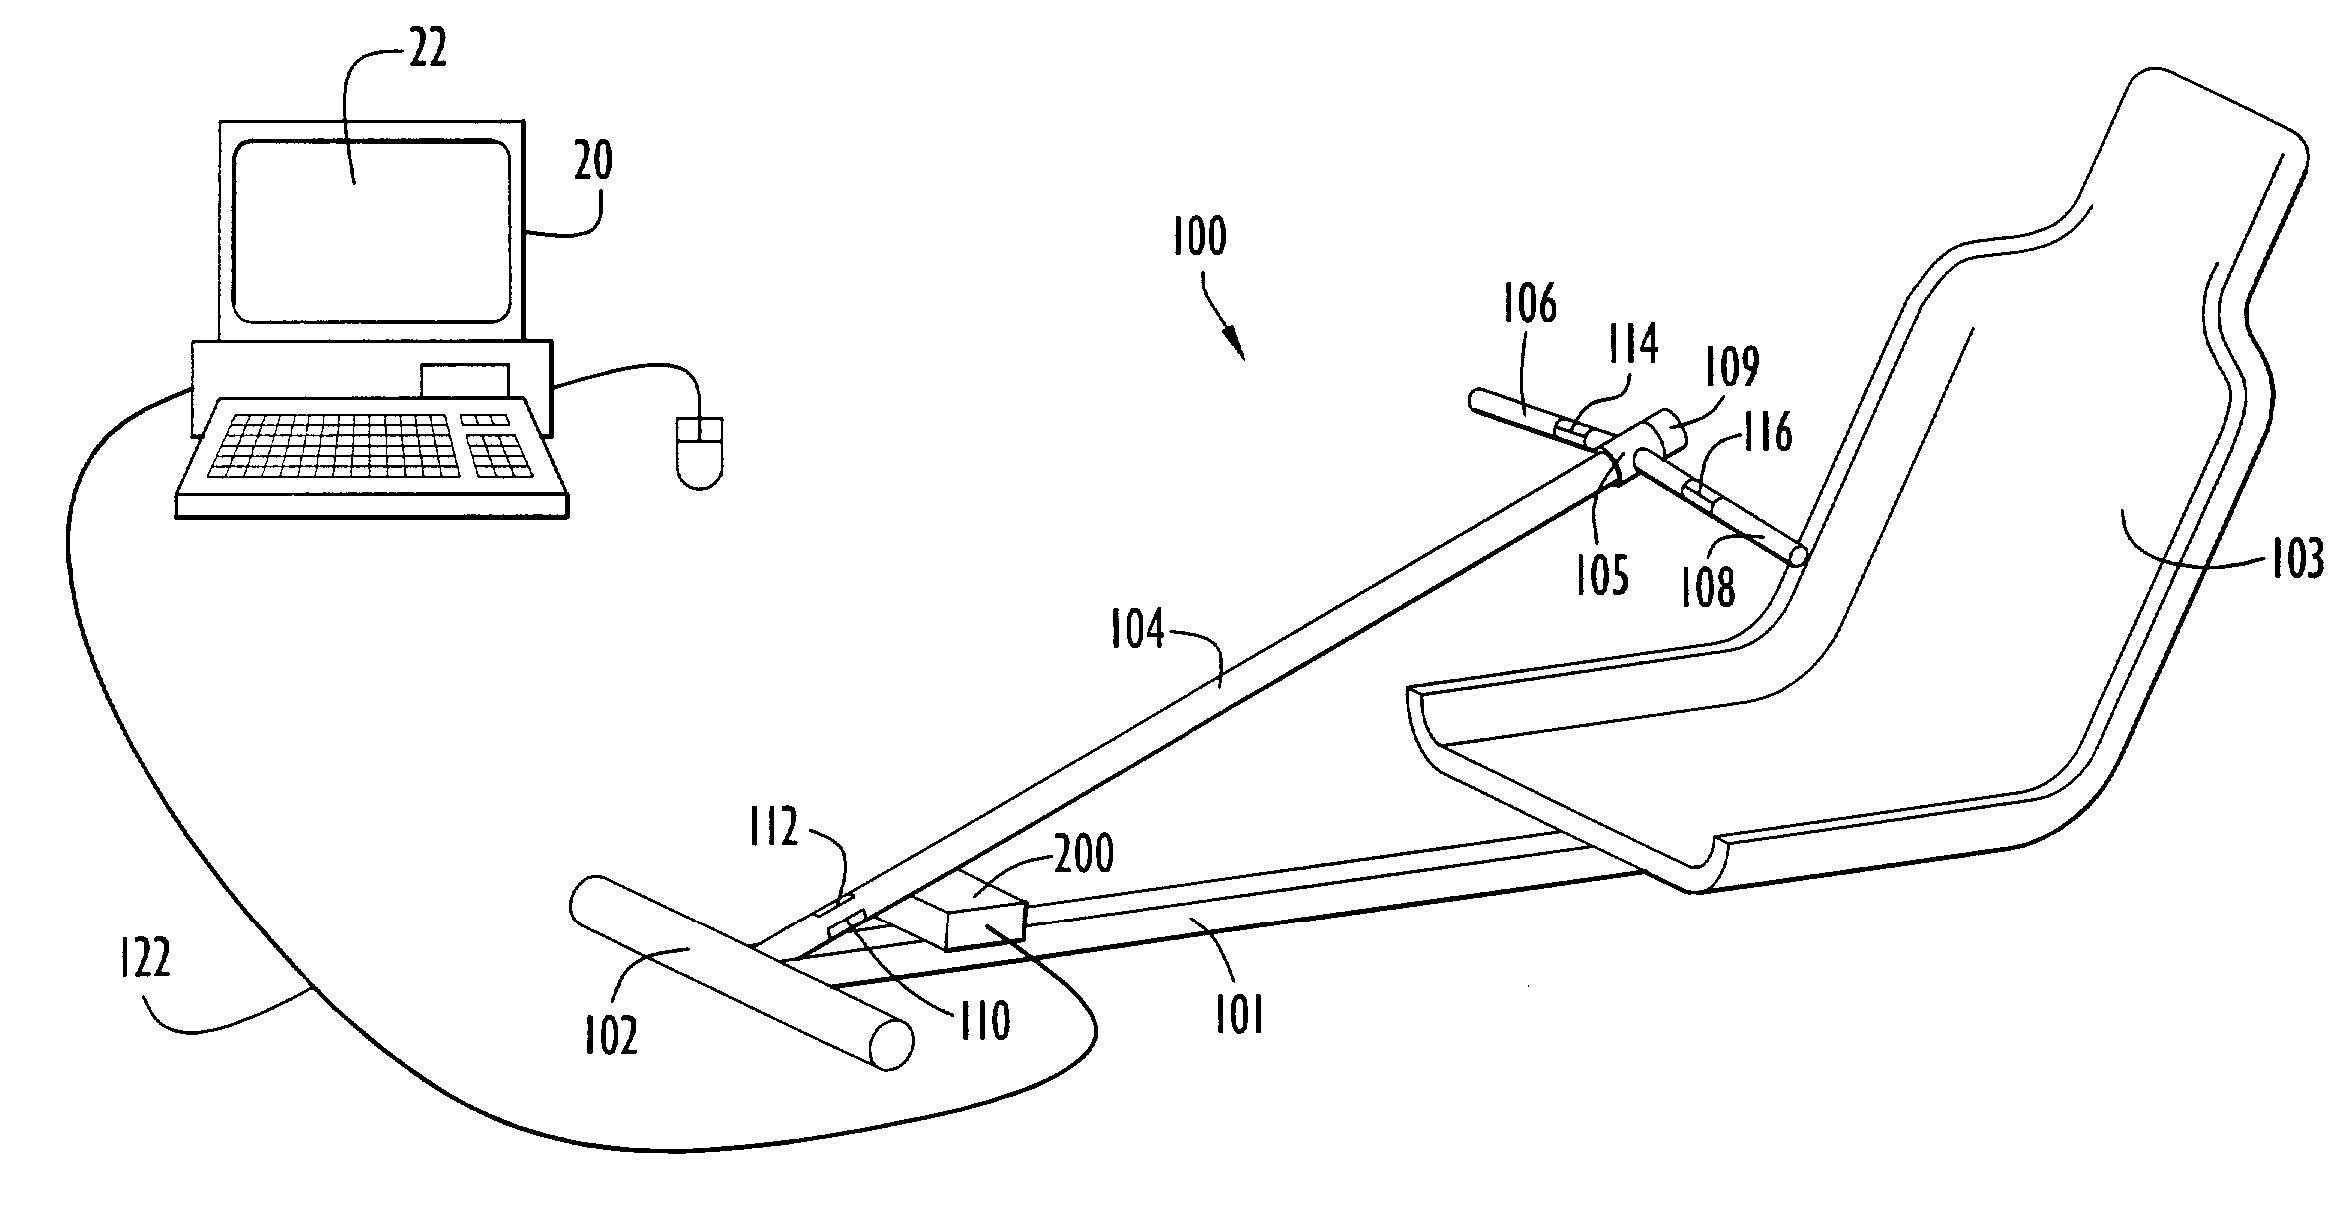 Computer interactive isometric exercise system and method for operatively interconnecting the exercise system to a computer system for use as a peripheral